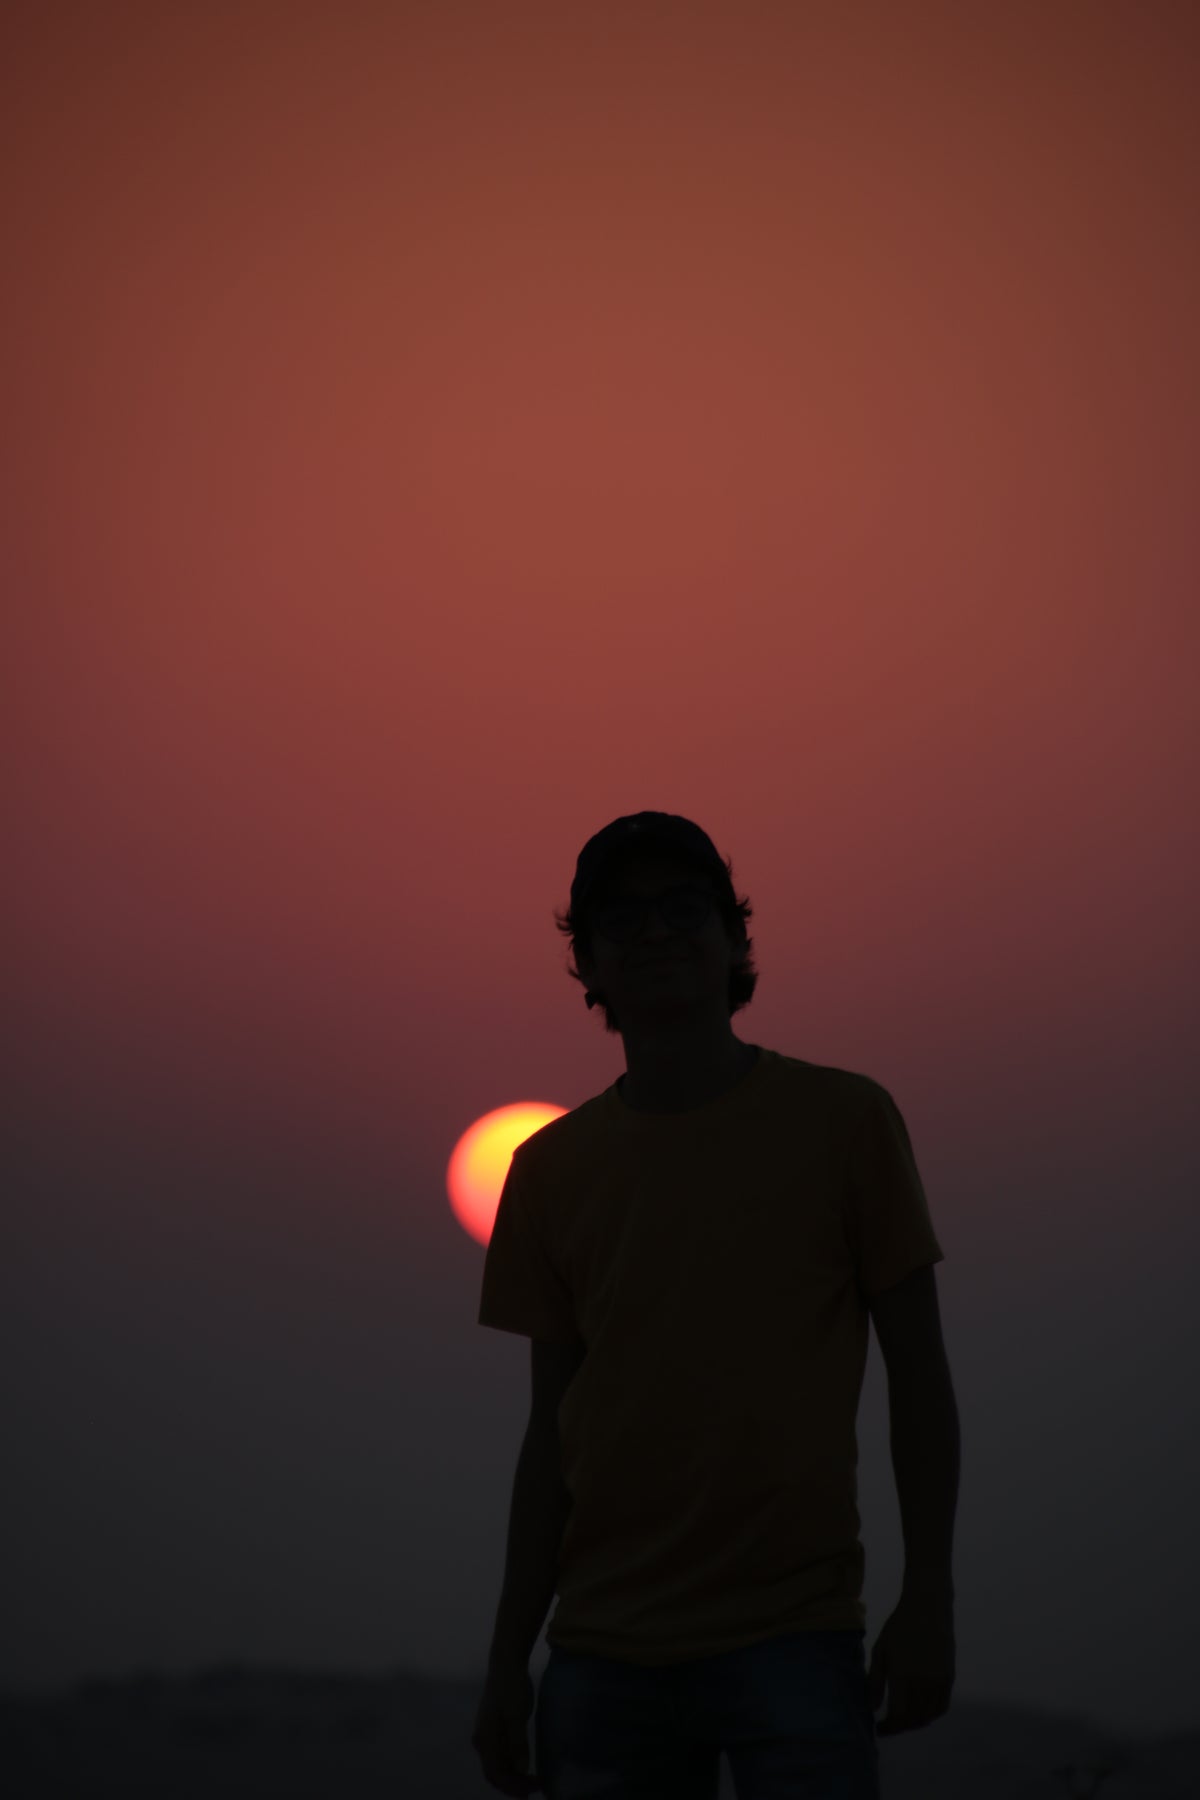 silhouette of a person with a baseball cap against a setting sun